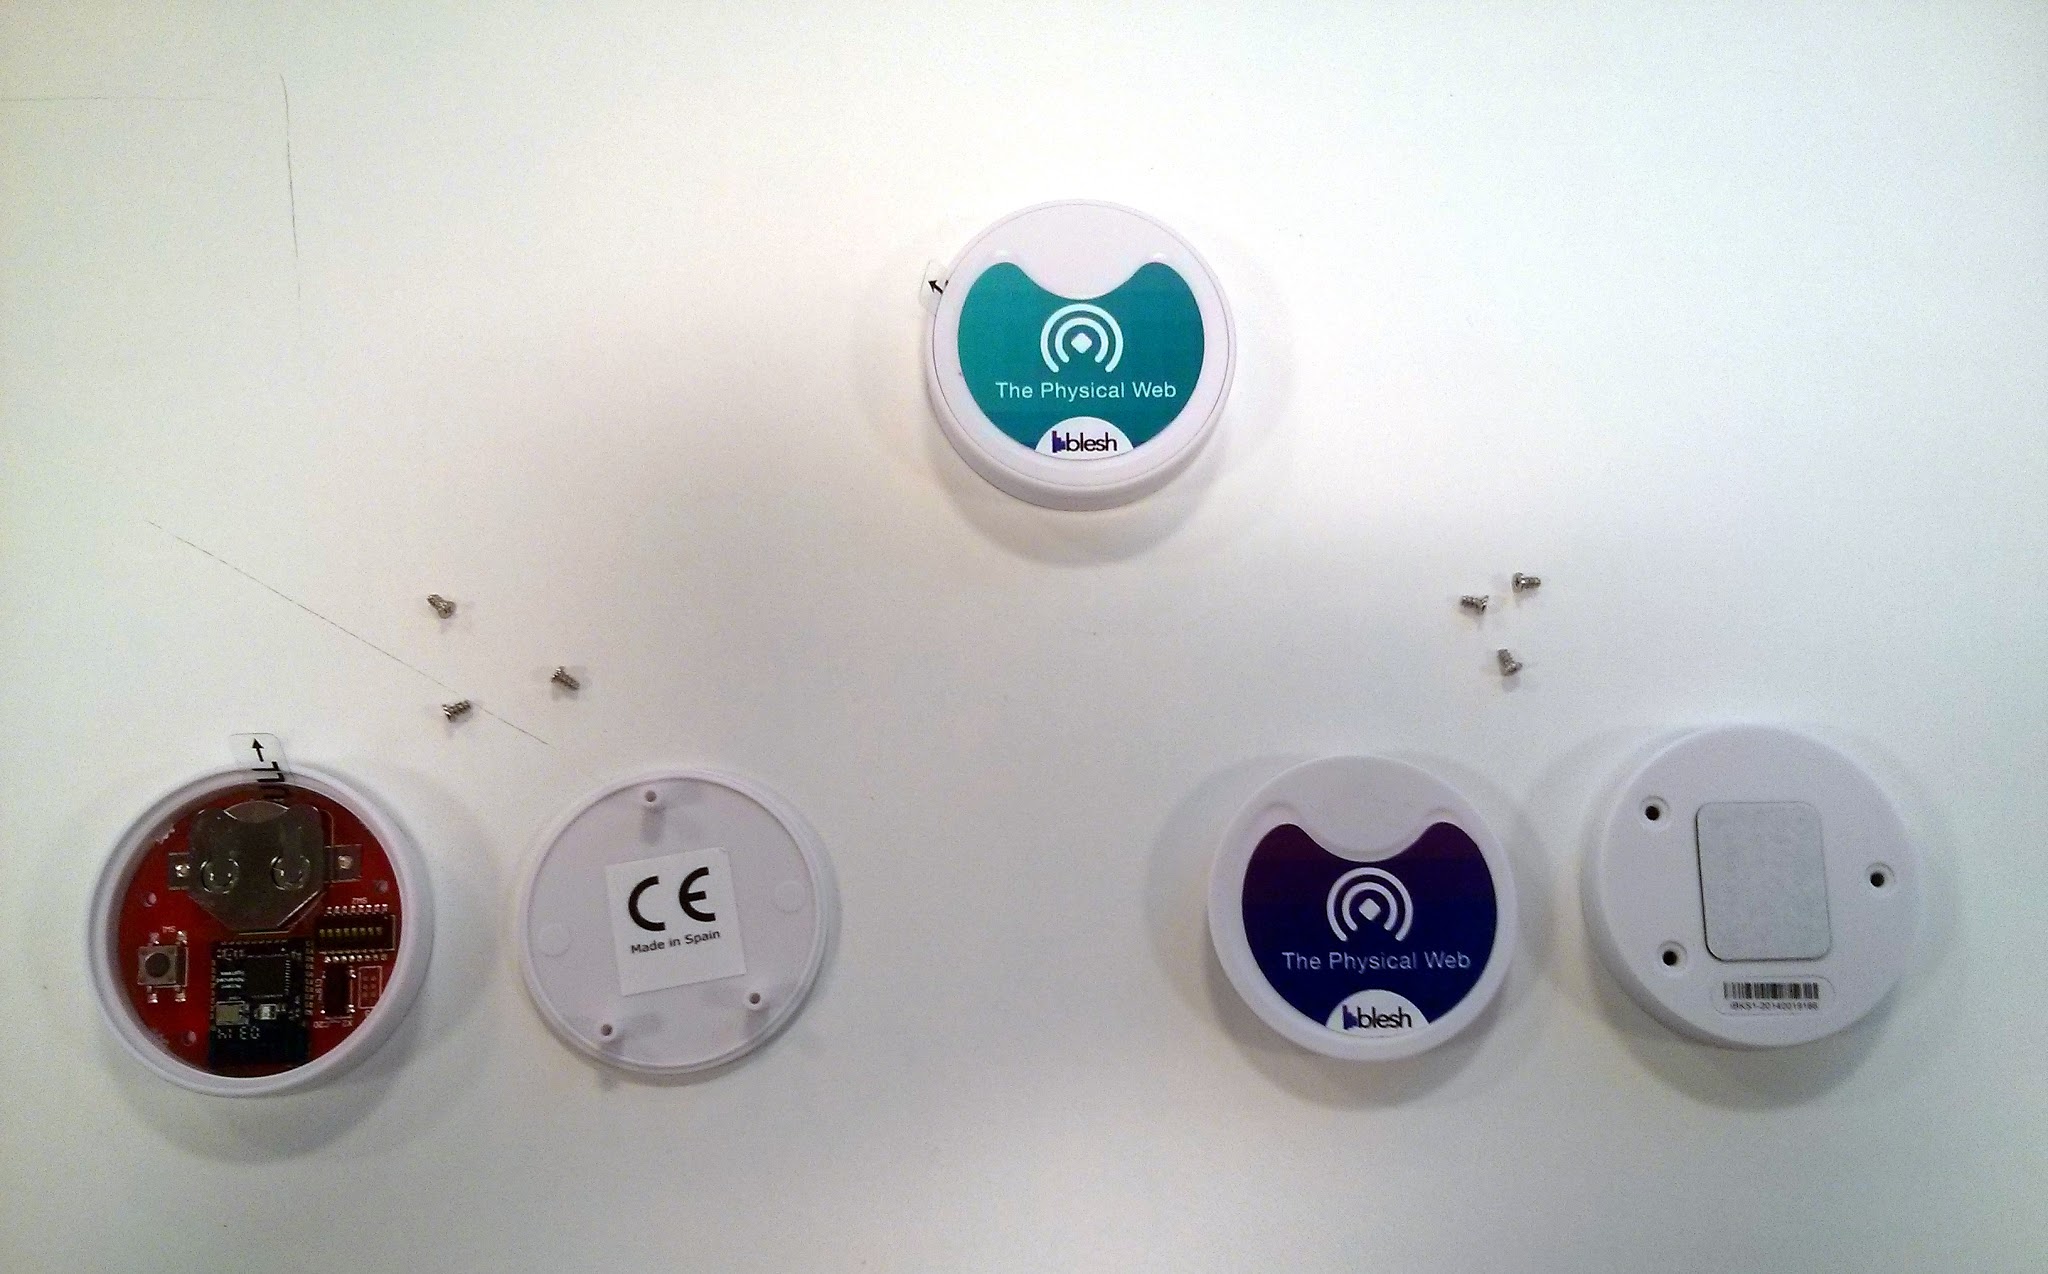 The Physical Web beacons by Blesh